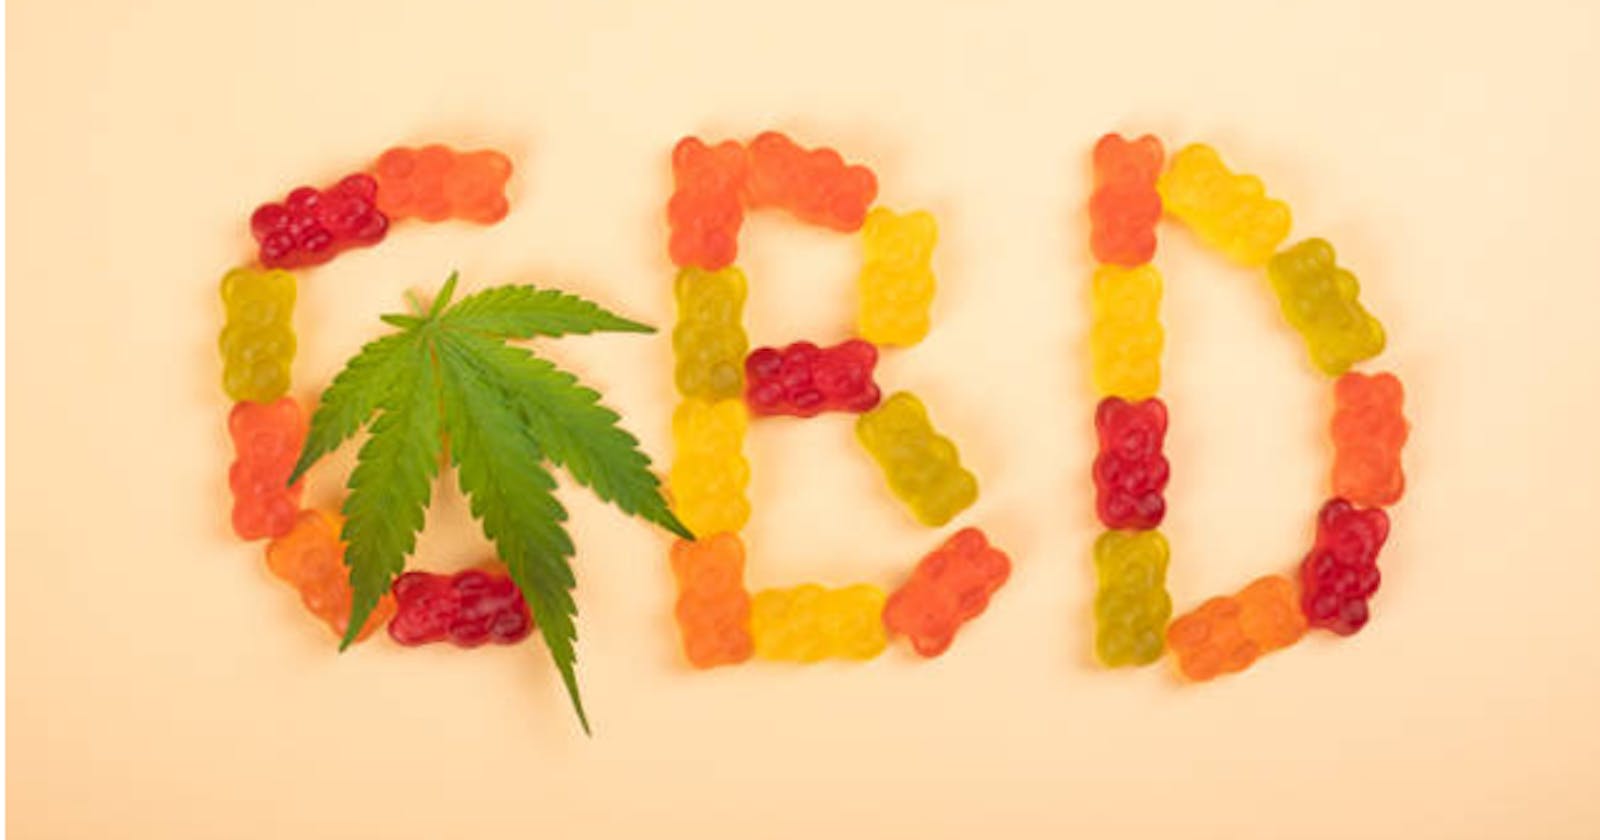 Sweet Relief CBD Gummies United Kingdom Official Website, Working, Reviews & Price! Uses, Side Effects, and More!